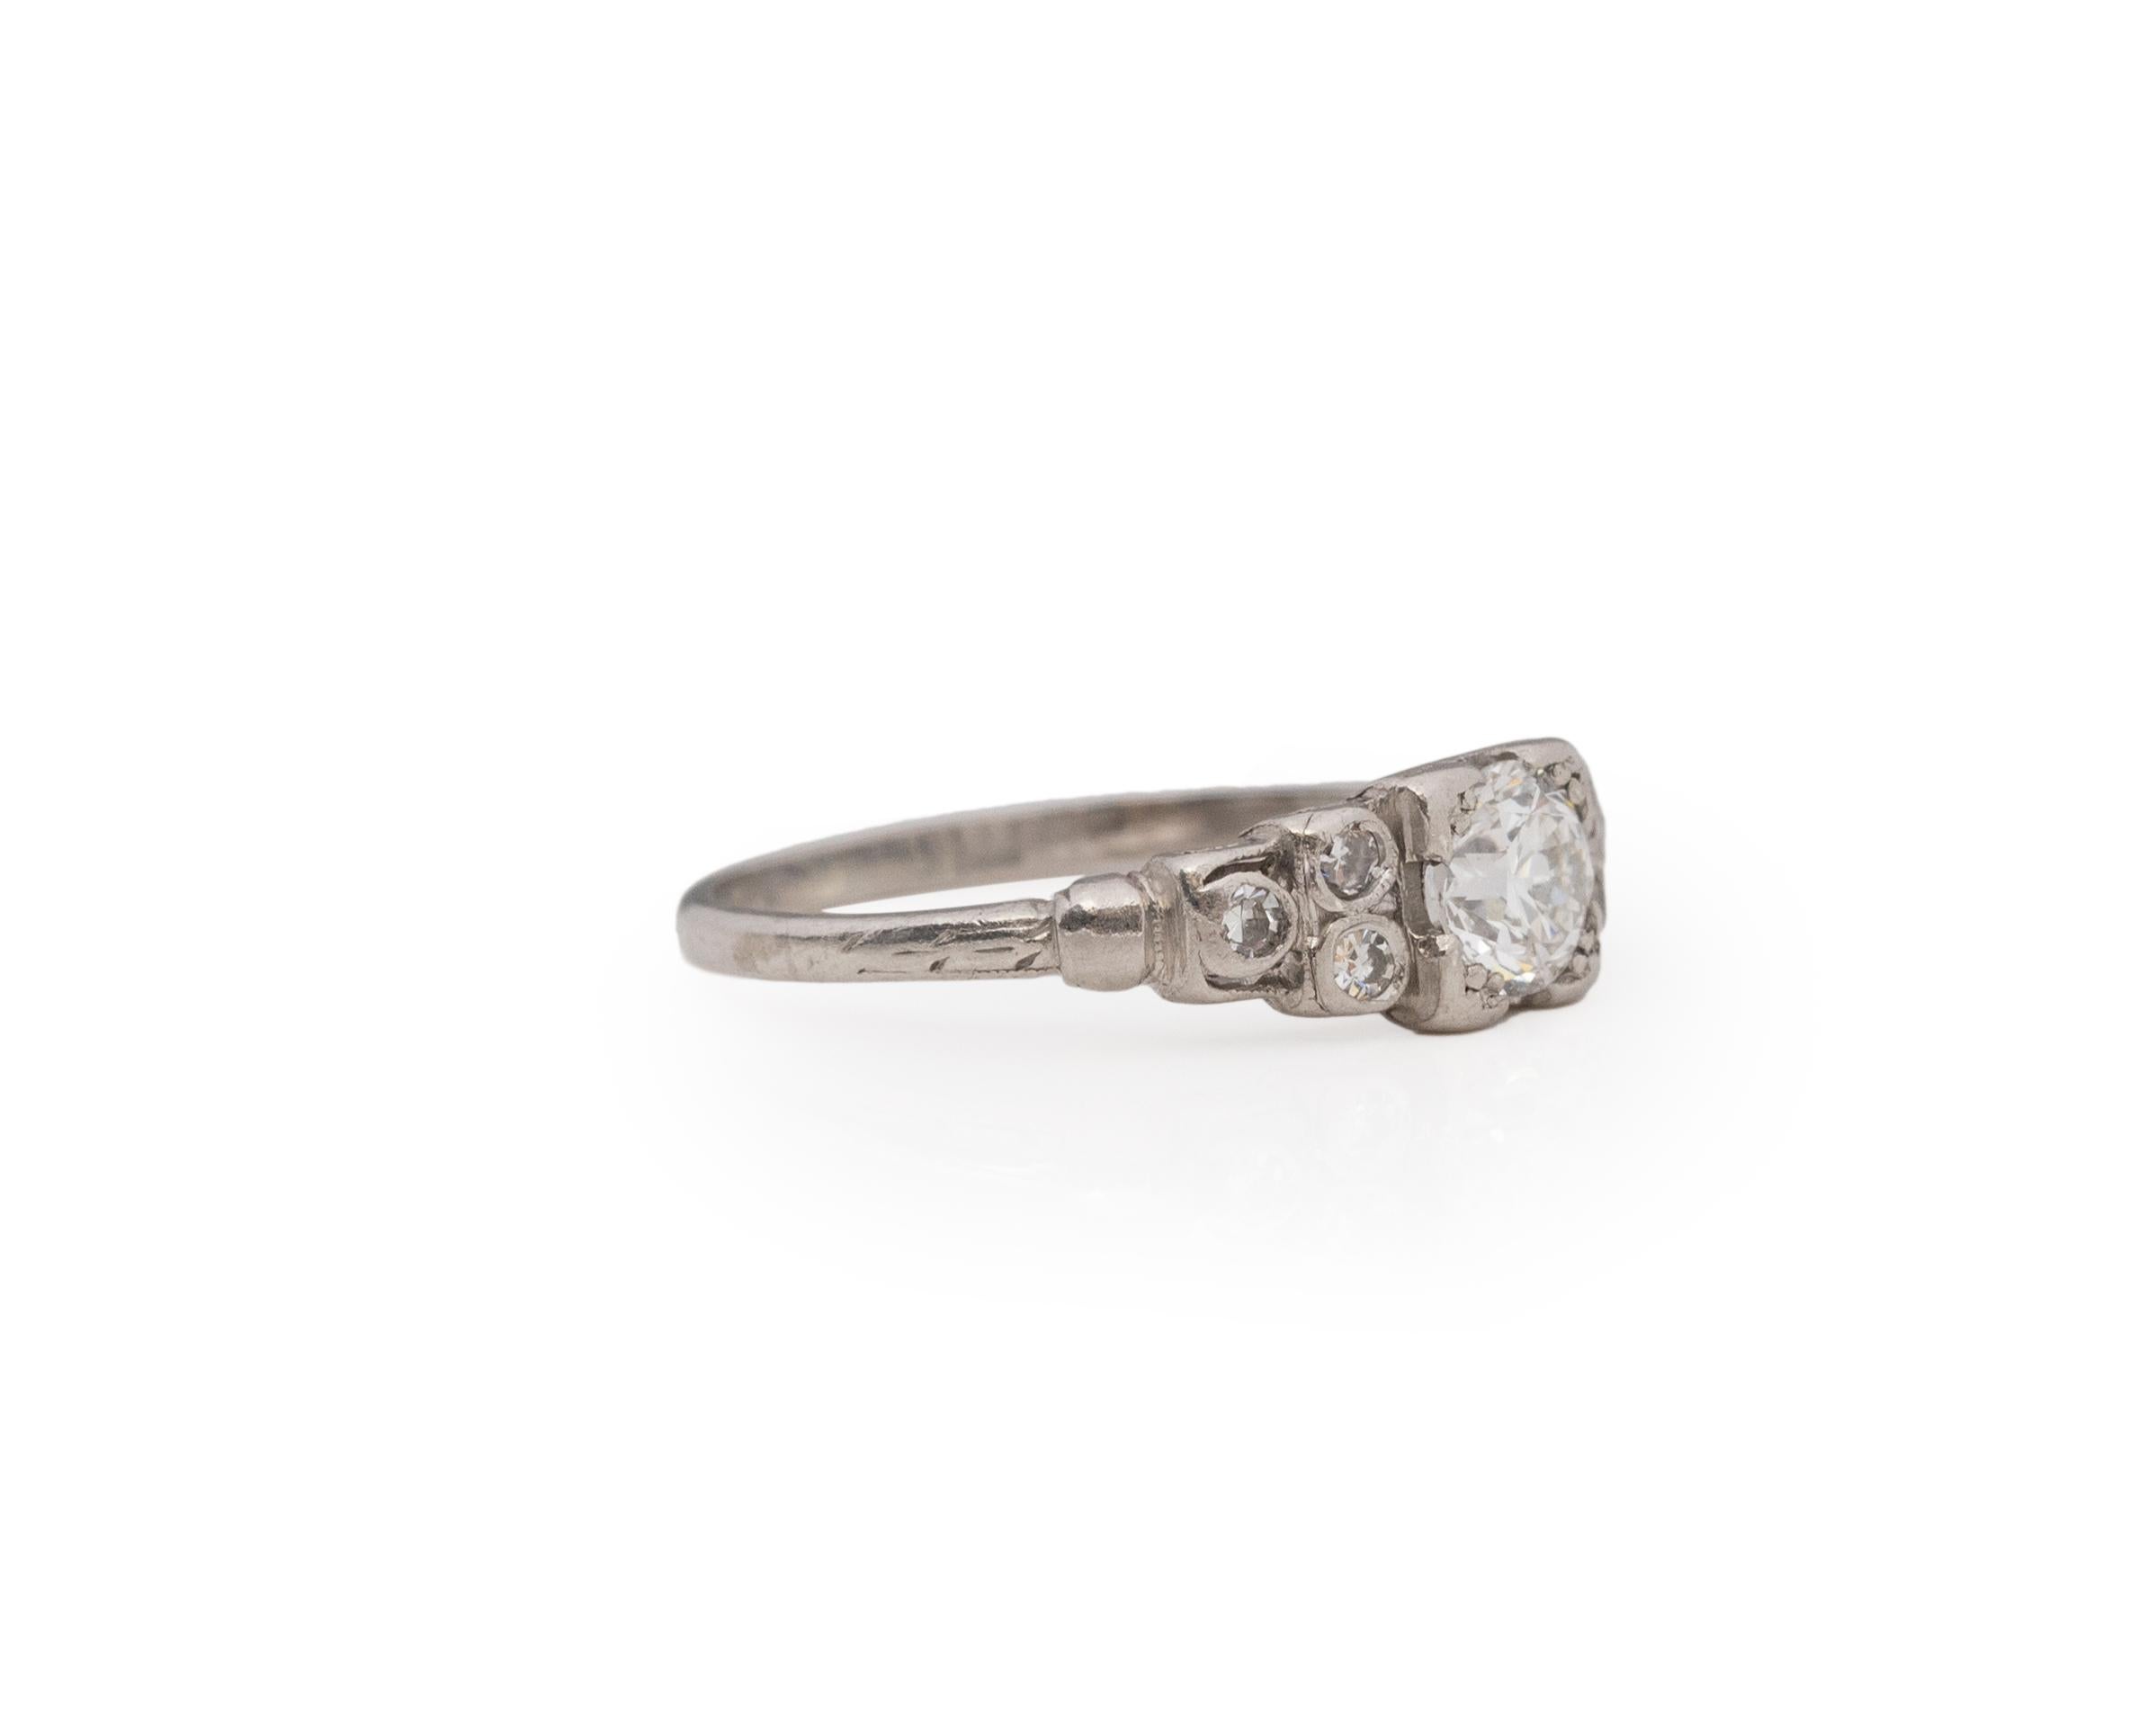 Ring Size: 5.75
Metal Type: Platinum [Hallmarked, and Tested]
Weight: 2.5 grams

Center Diamond Details:
Weight: .51ct
Cut: Old European brilliant
Color: F
Clarity: VS1

Finger to Top of Stone Measurement: 5mm
Condition: Excellent